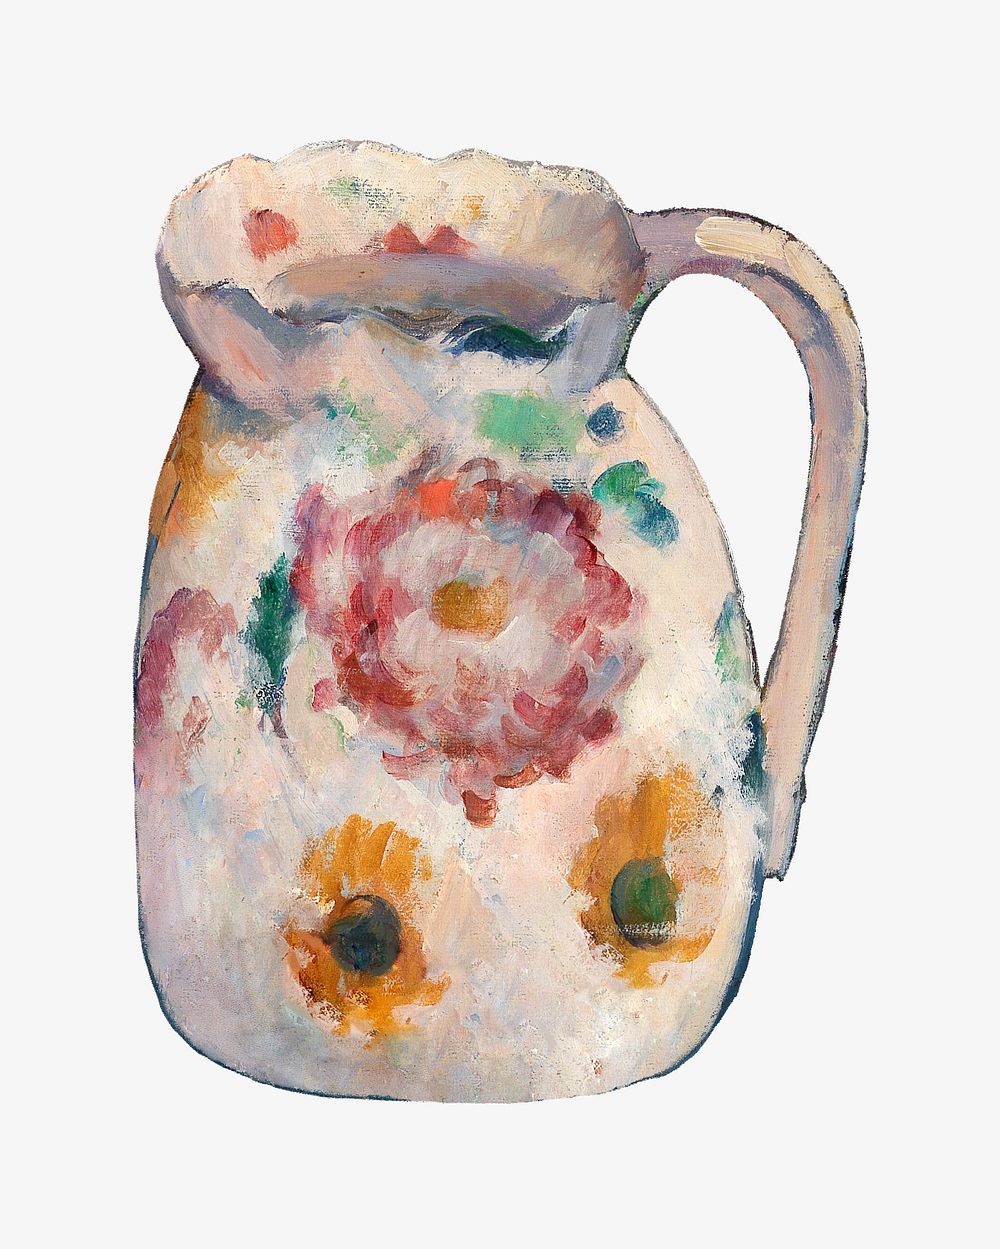  Paul Cezanne&rsquo;s jug, still life painting.  Remixed by rawpixel.